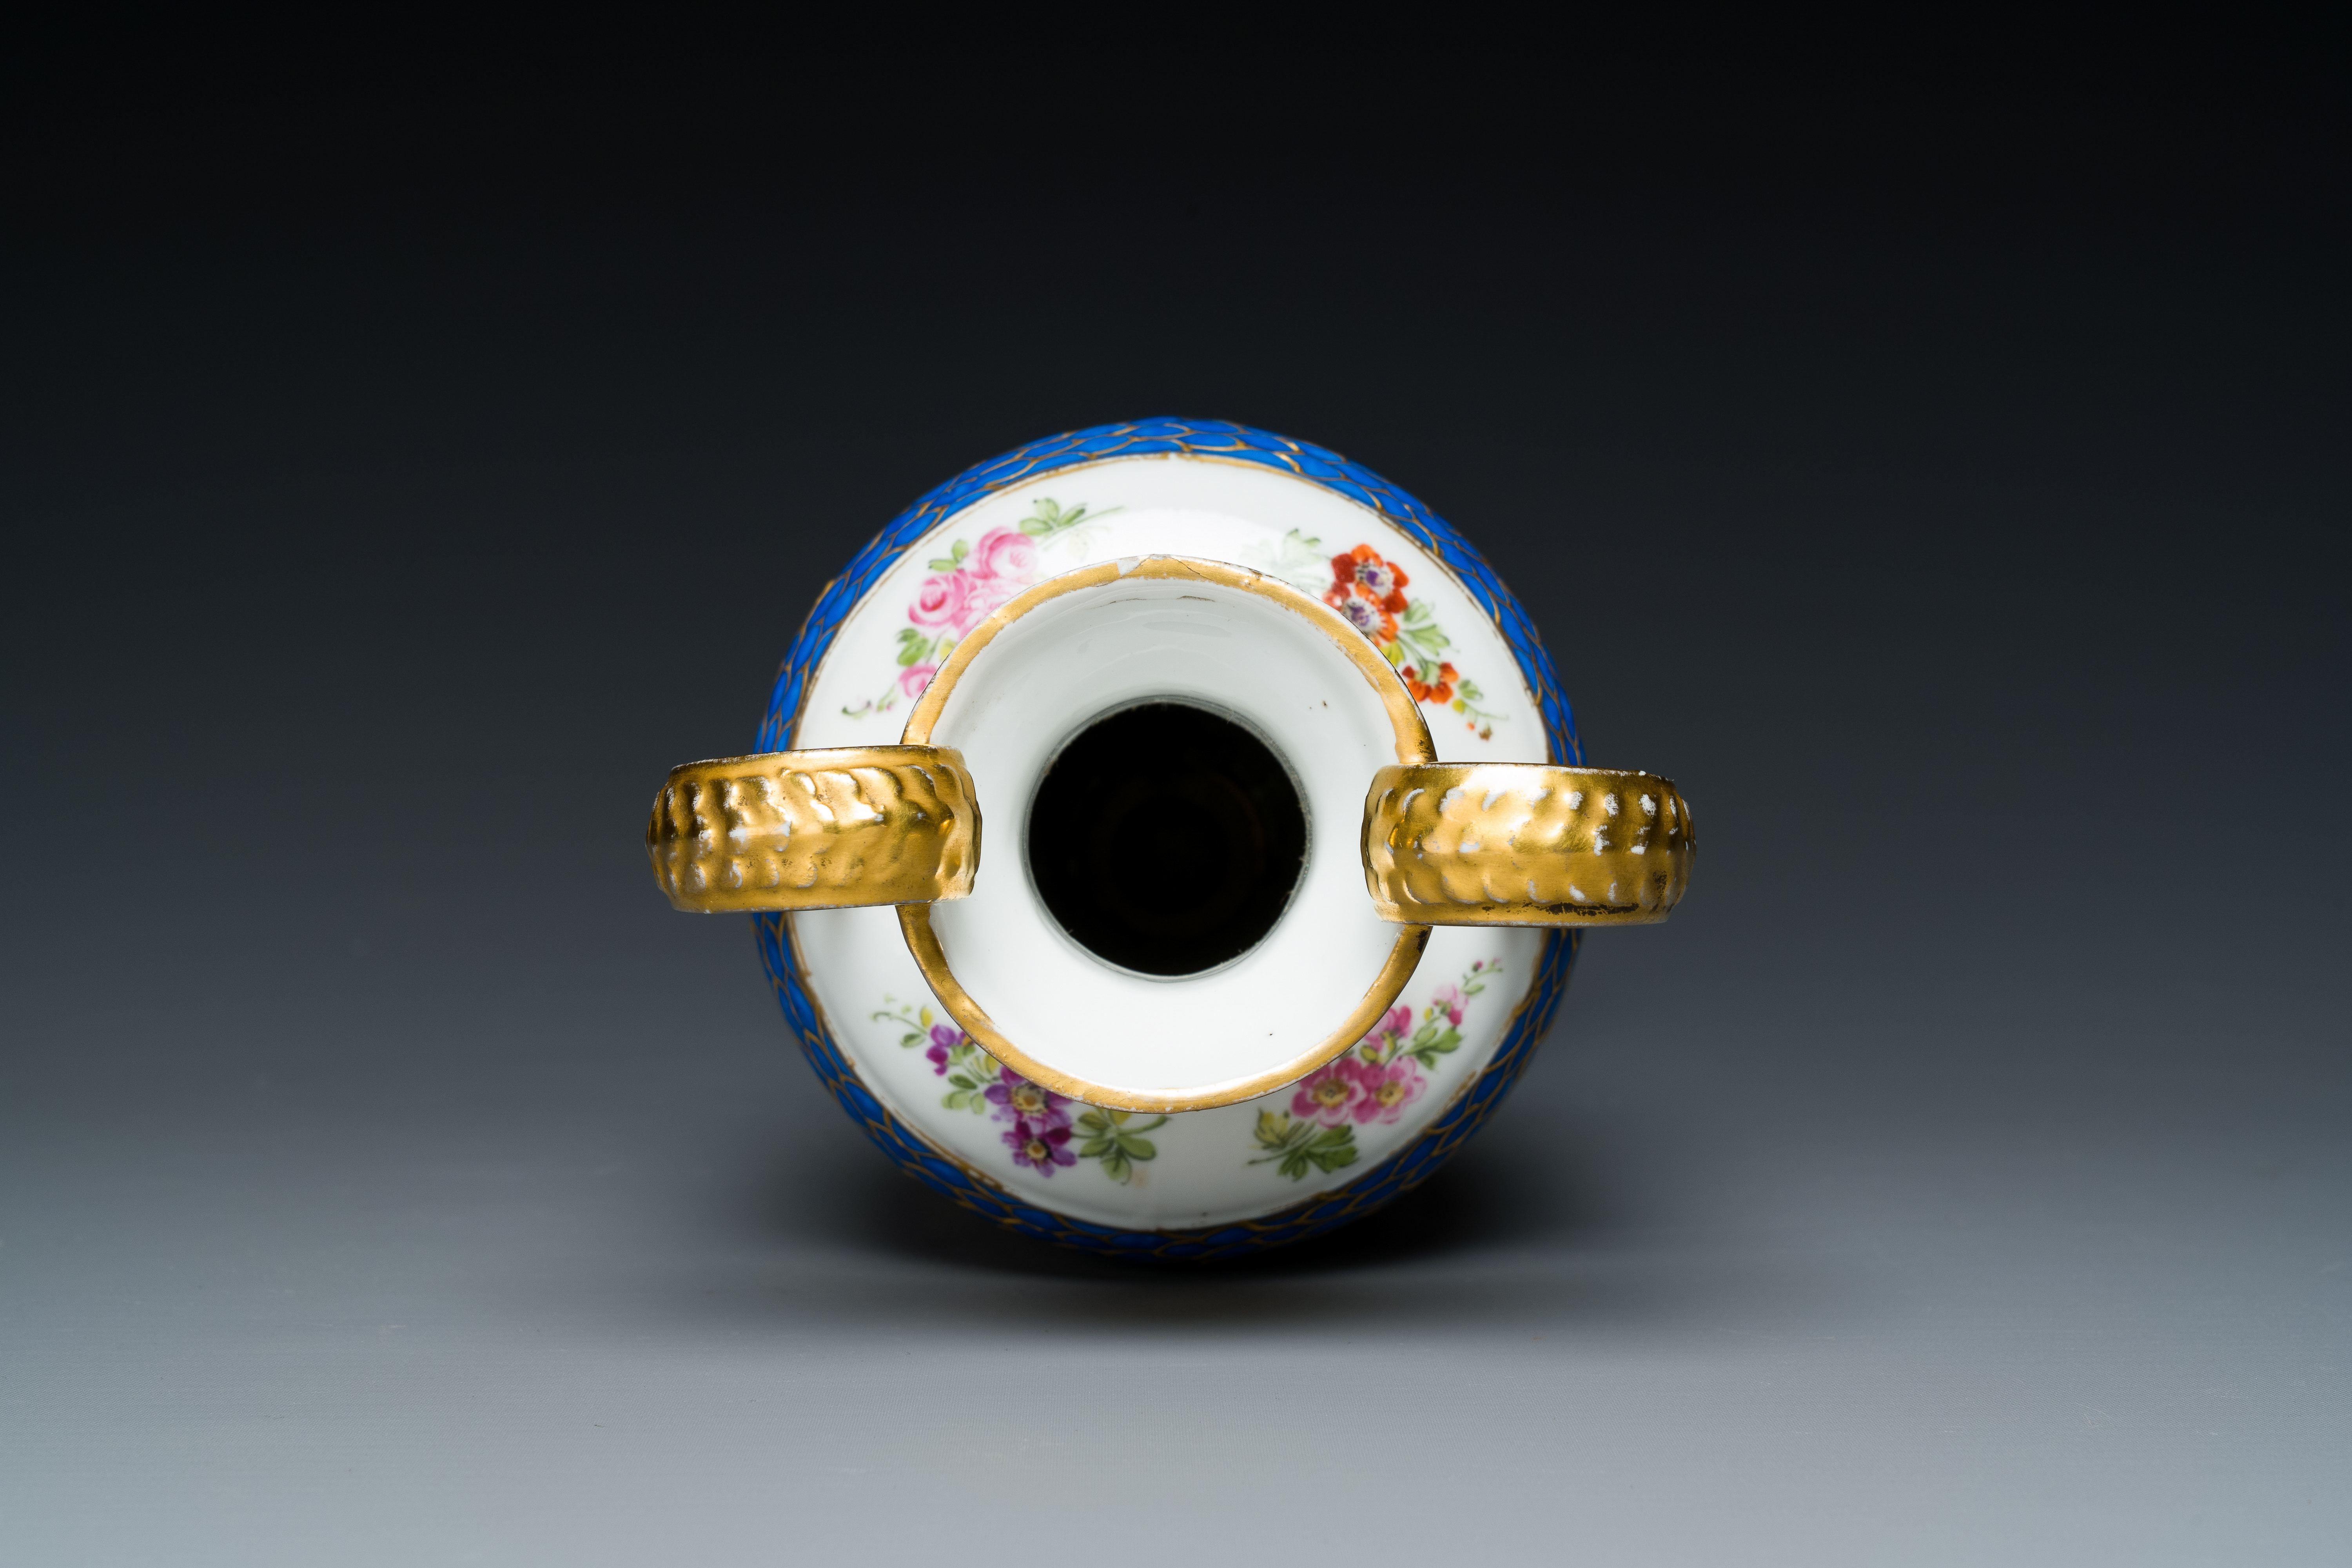 A French polychrome porcelain Sevres-style vase, 19th C. - Image 12 of 16